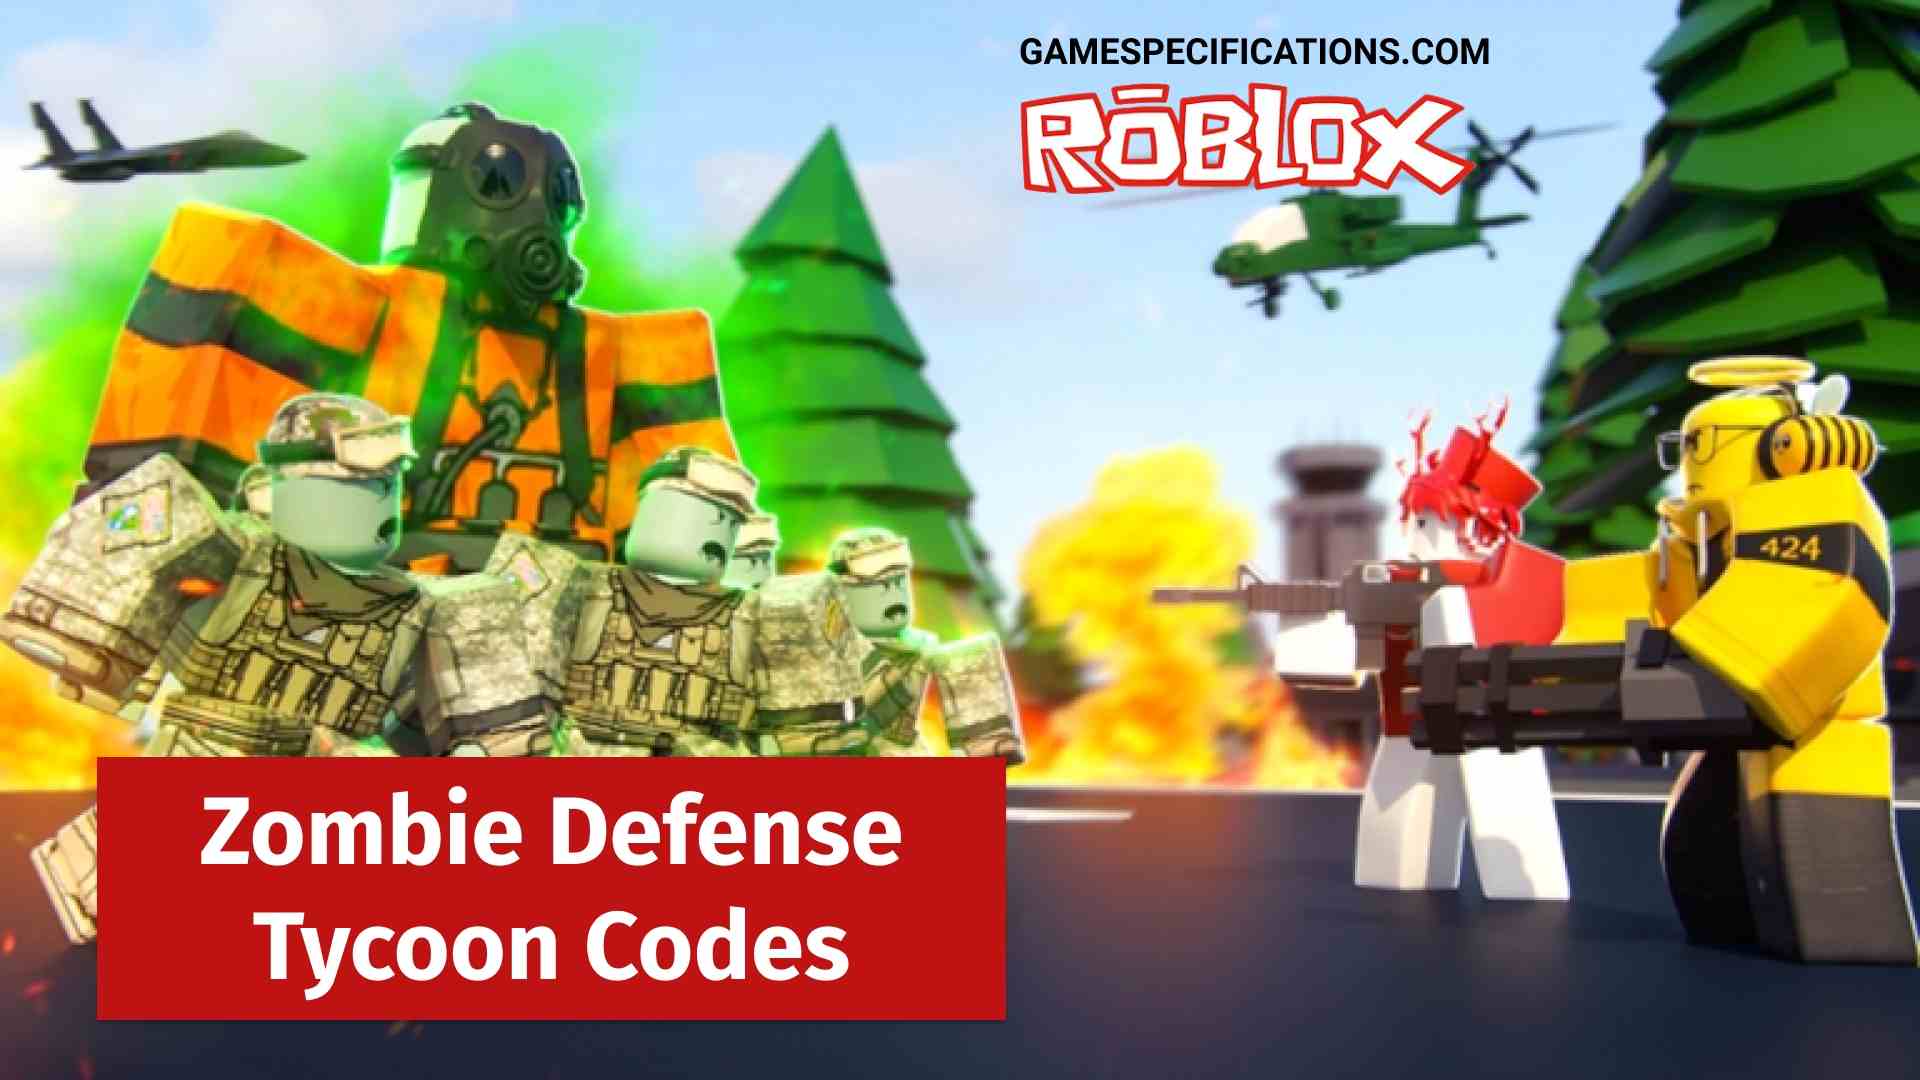 Roblox Zombie Defense Tycoon Codes July 2021 Game Specifications - roblox zombie apocalypse series